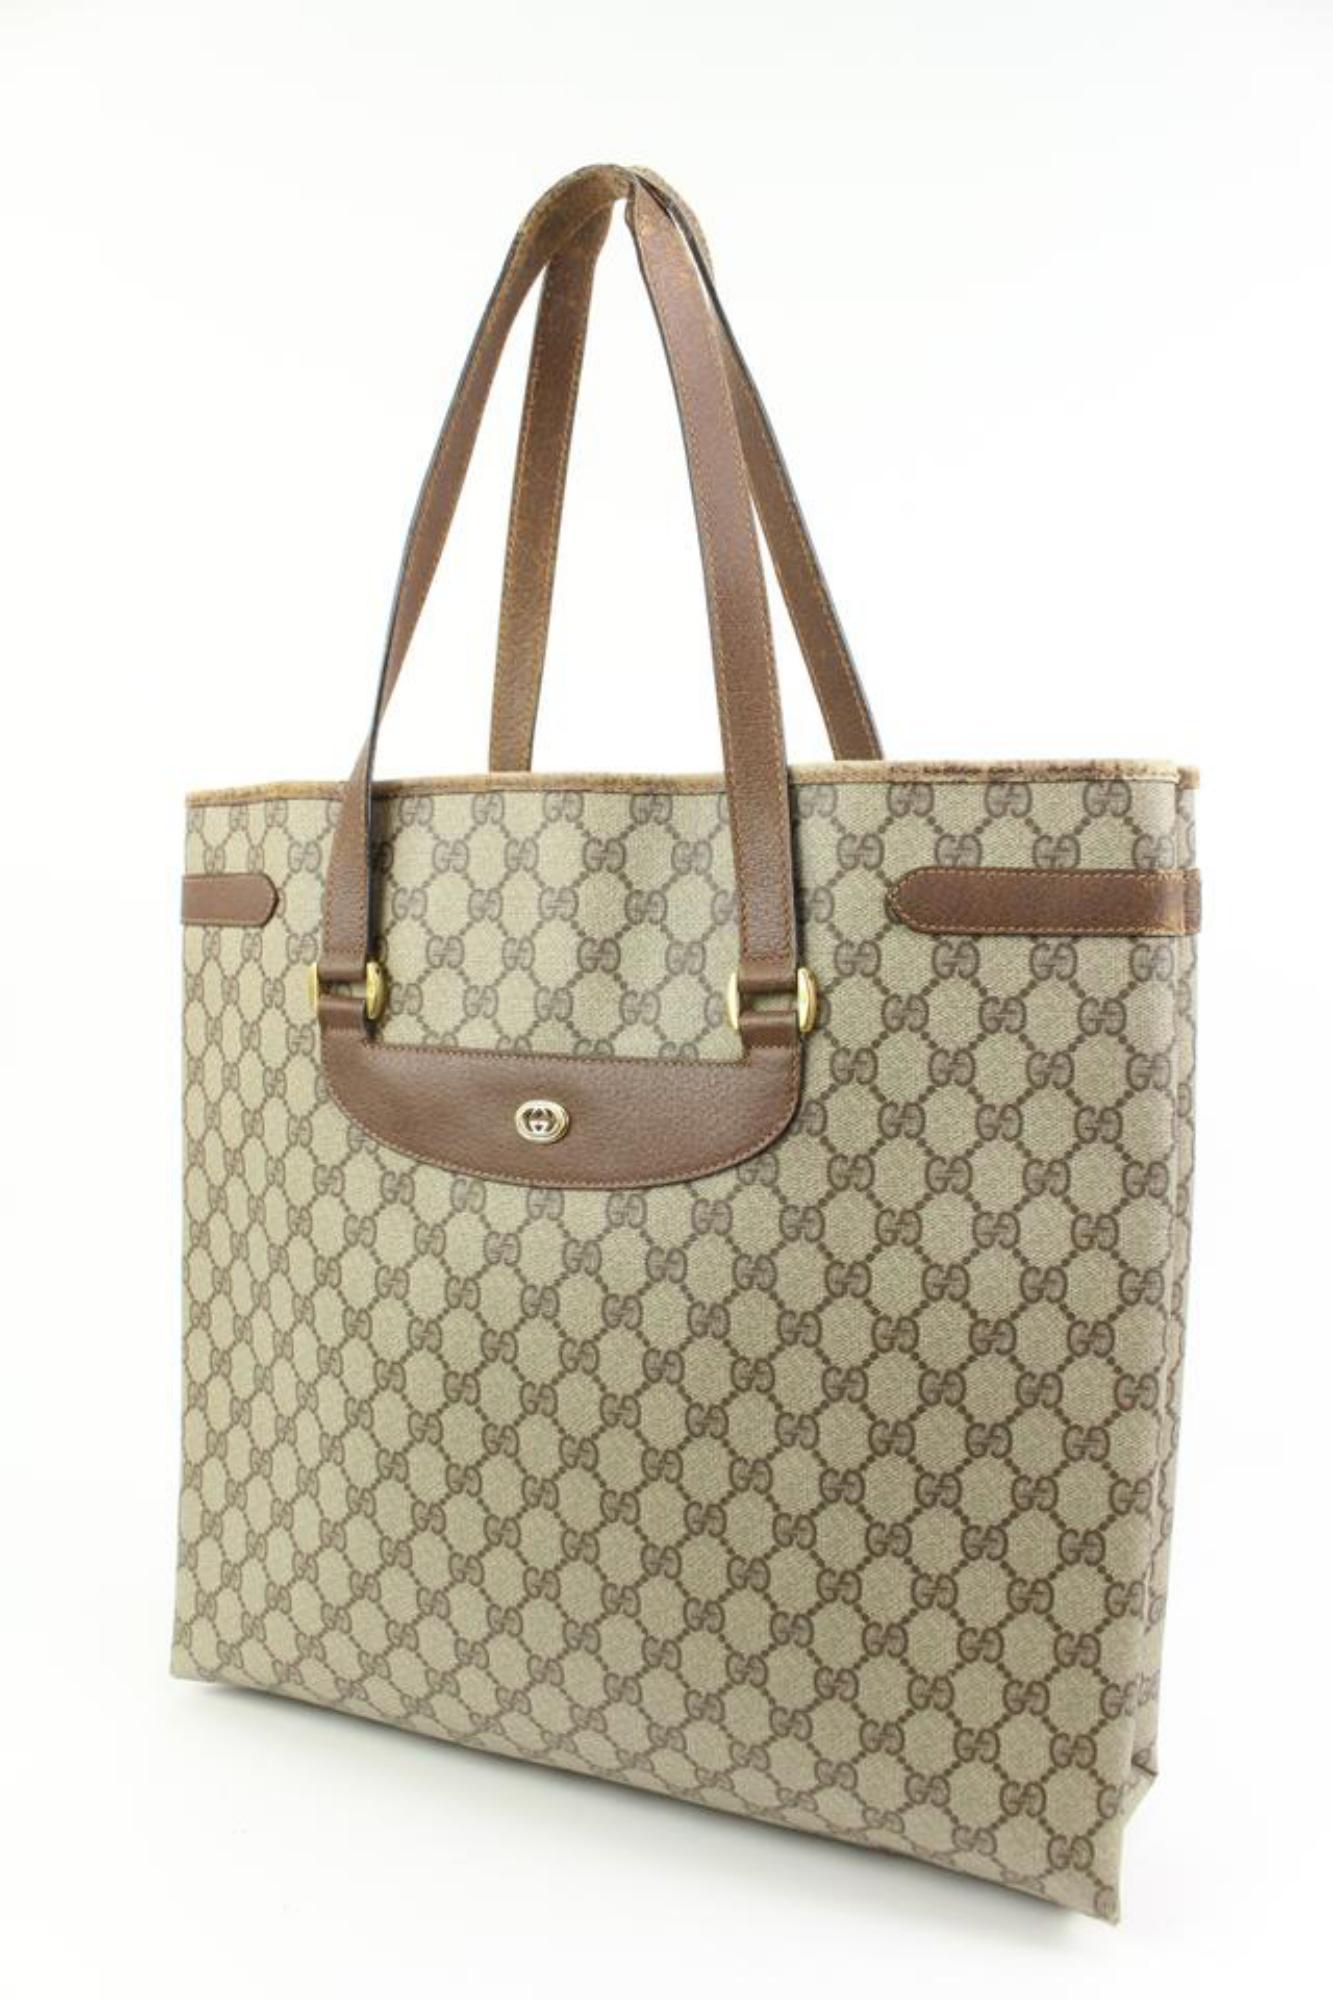 Gucci Brown Supreme GG Shopper Tote Bag Upcycle Ready 75gz411s
Date Code/Serial Number: 39.02.061
Made In: Italy
Measurements: Length:  15.5